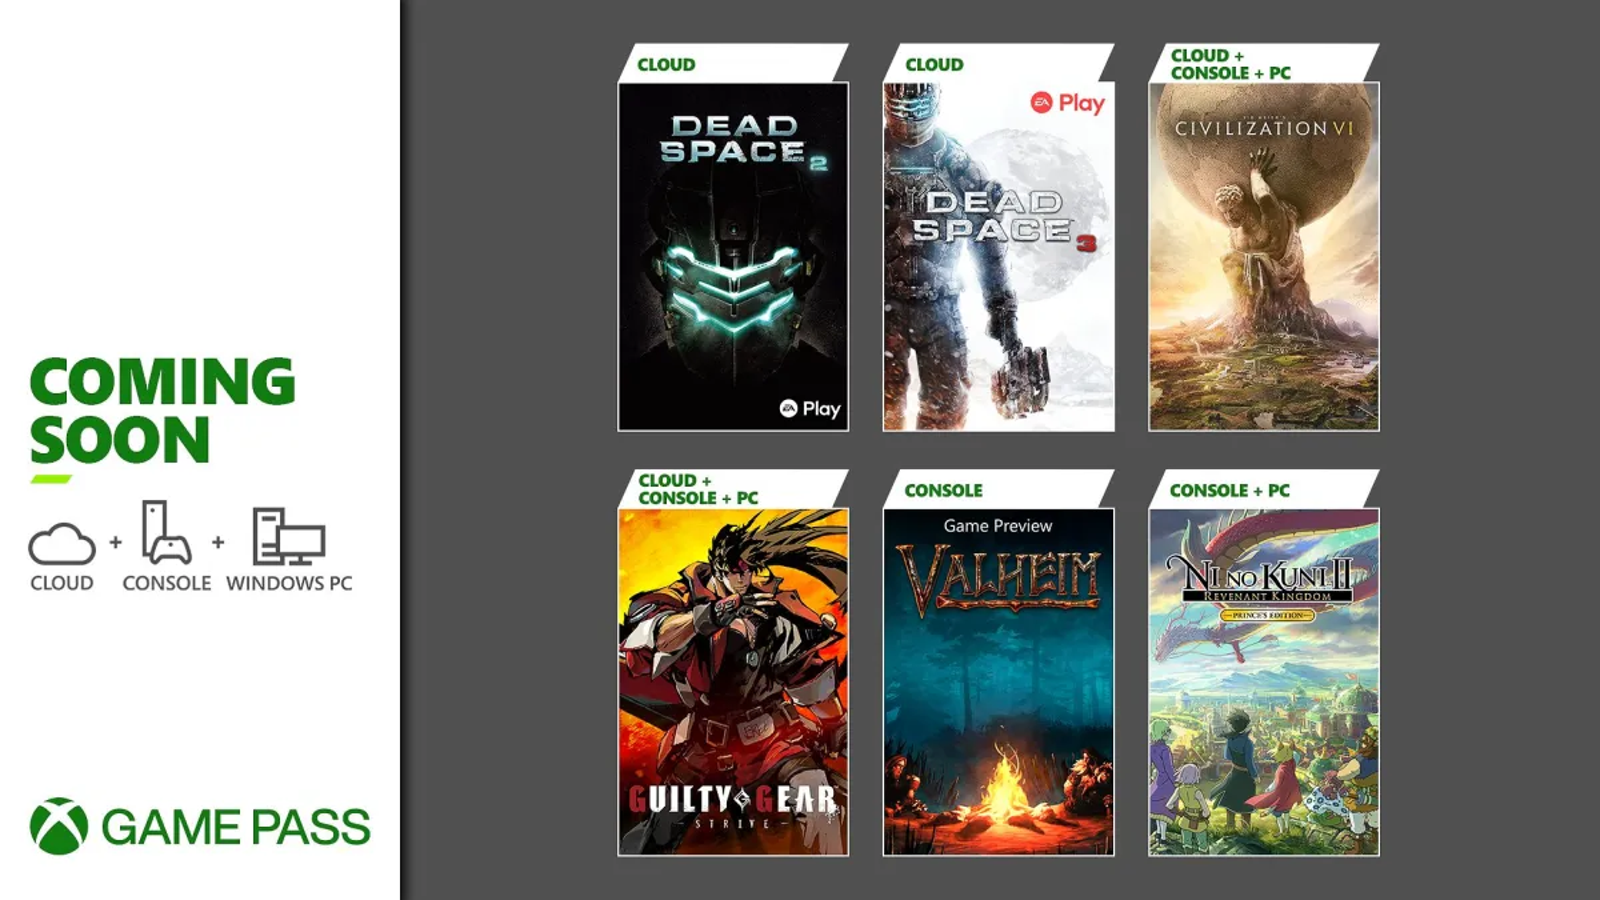 Xbox Game Pass confirms all the games coming to the service later this  month, including the Dead Space remake - just in time for Halloween.